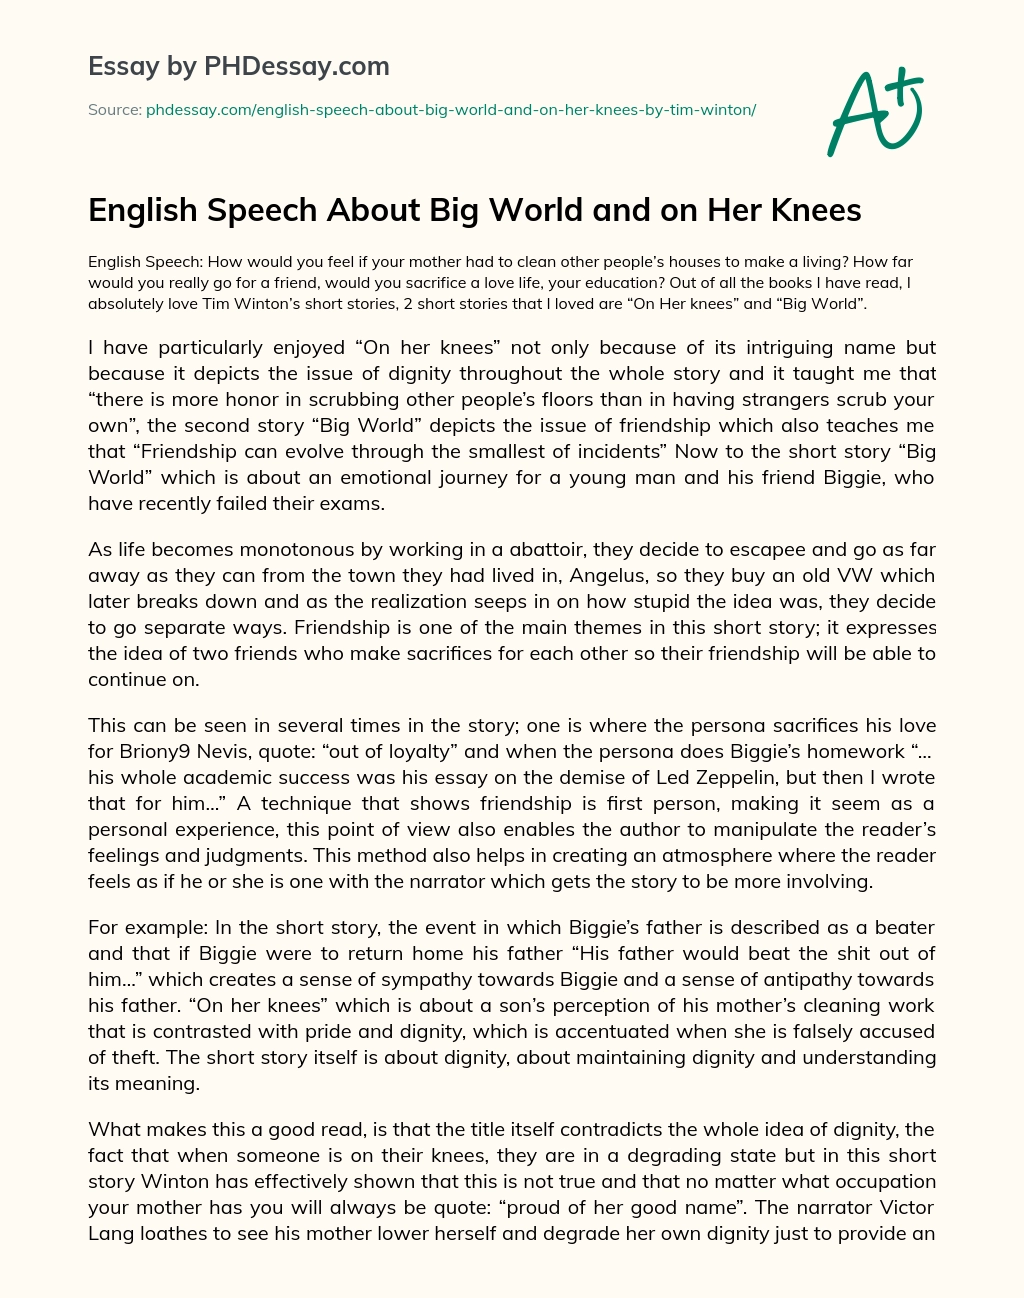 English Speech About Big World and on Her Knees essay